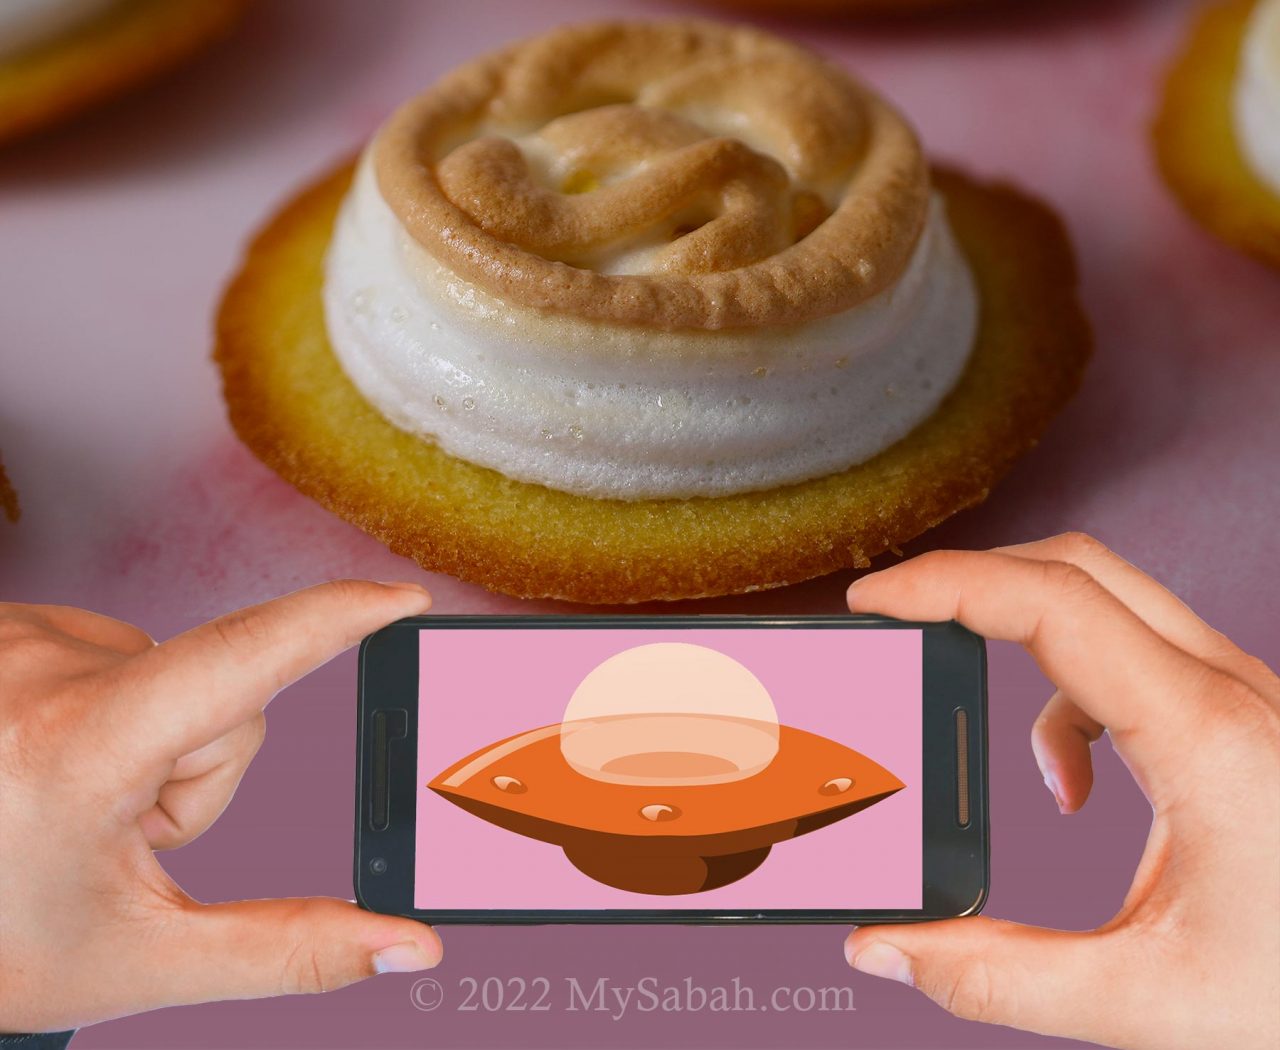 Taking a photo of UFO tart by smartphone